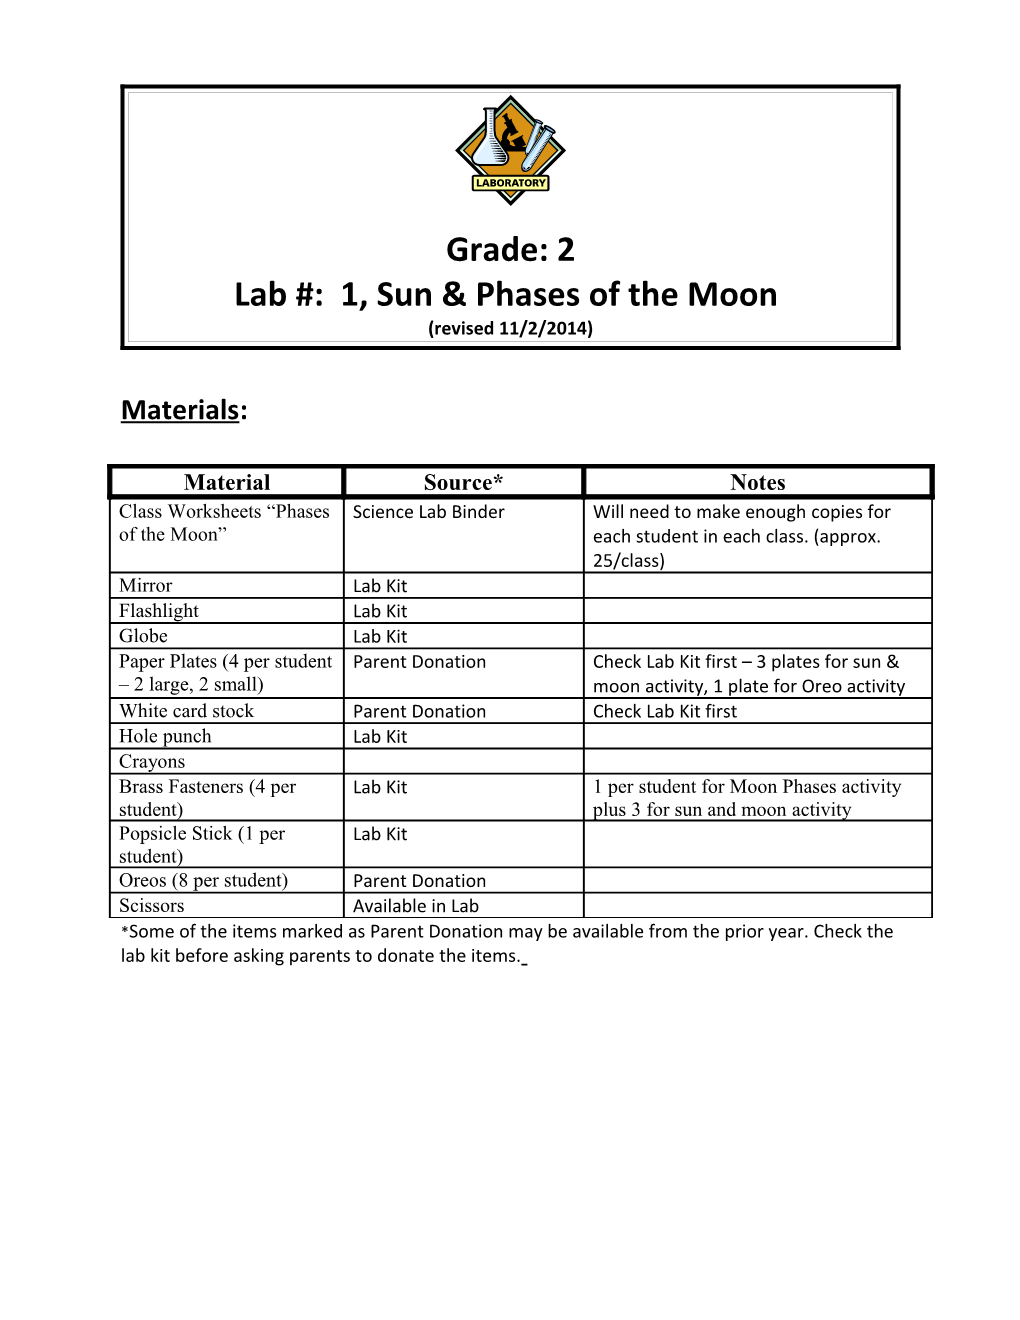 Lab #: 1, Sun & Phases of the Moon